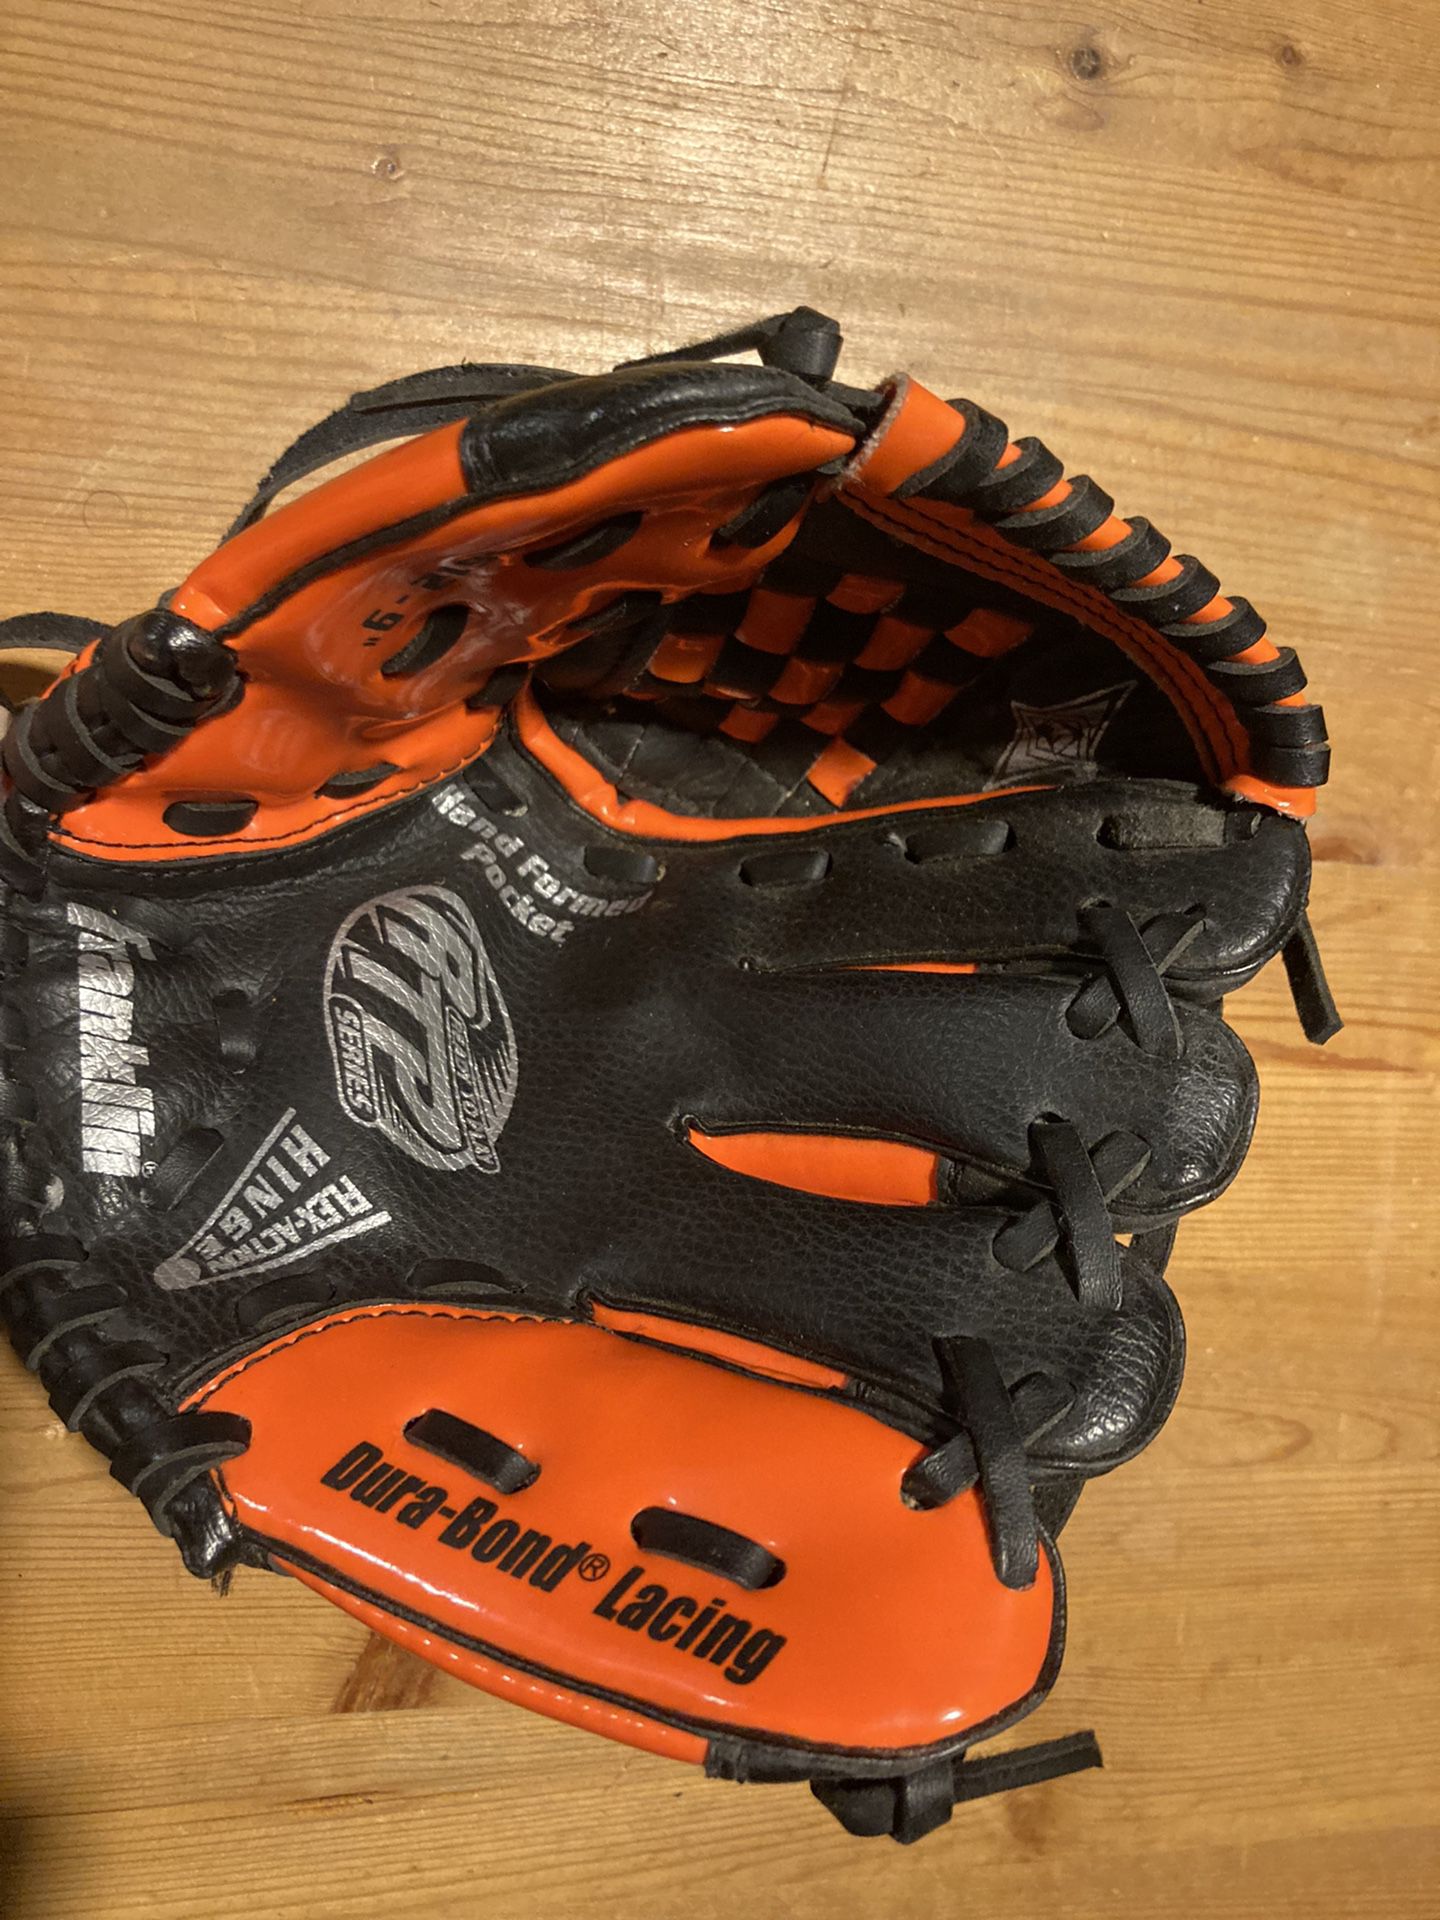 T-ball glove, great condition.